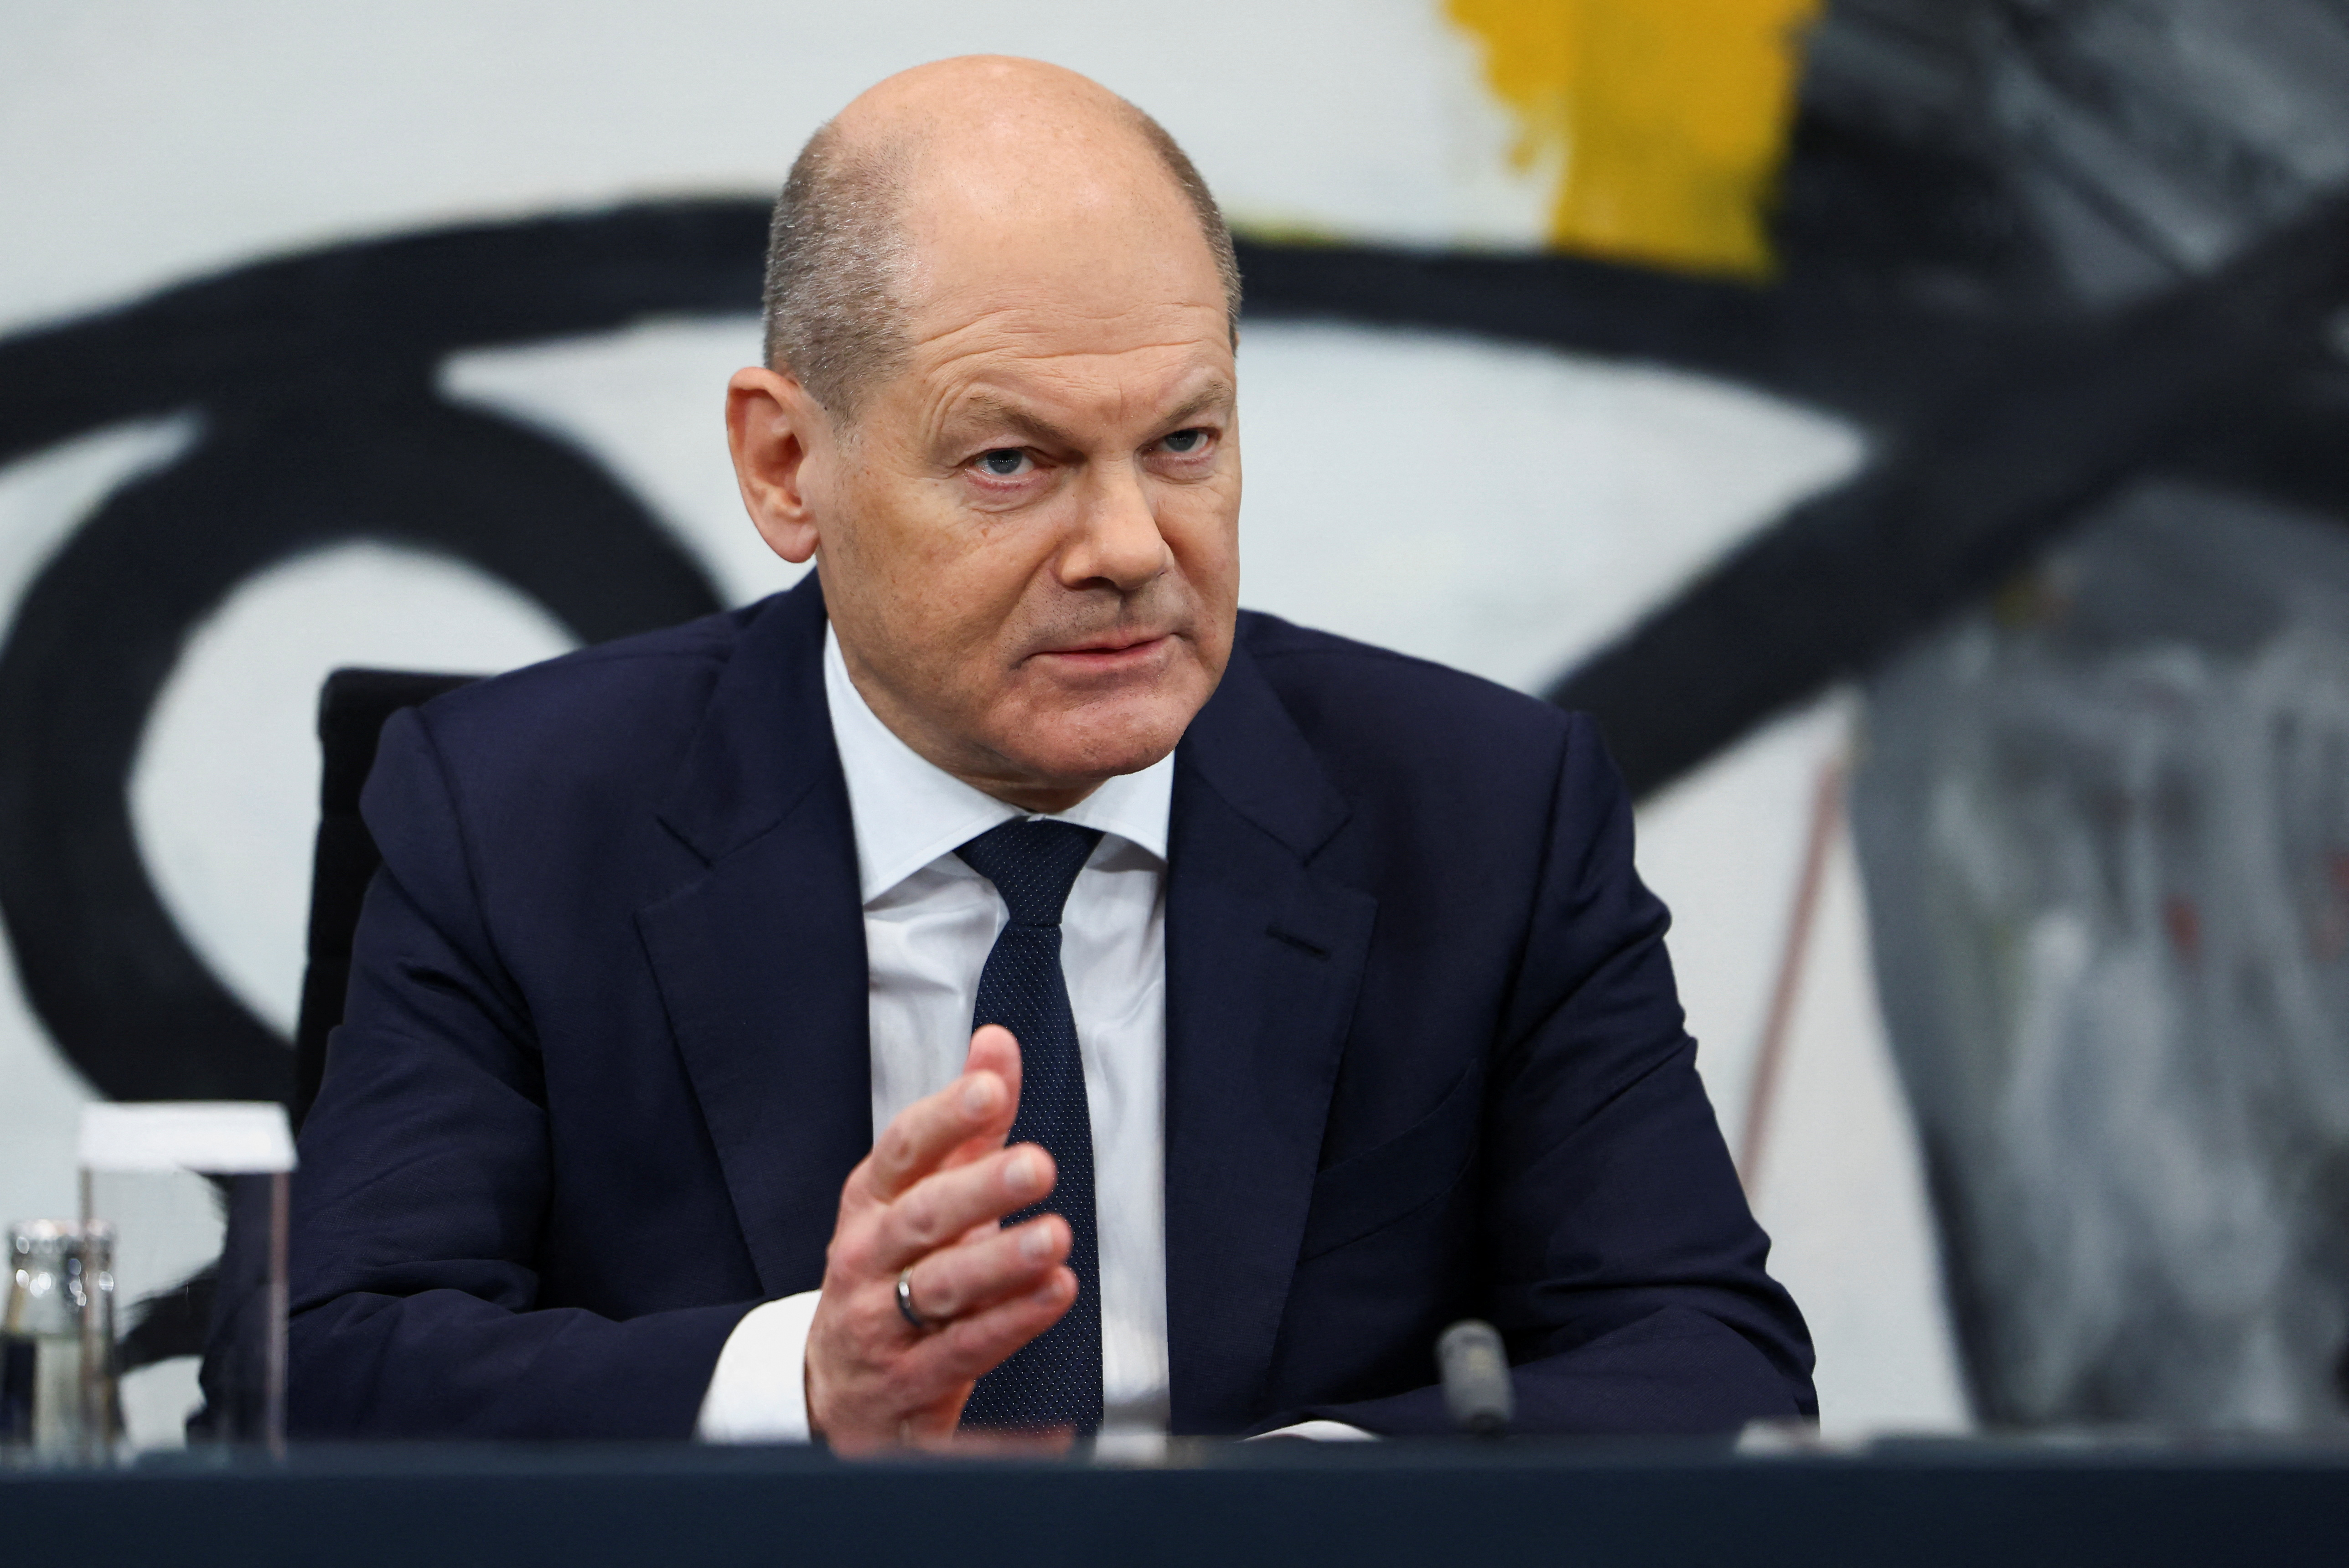 German Chancellor Scholz meets with state premiers in Berlin